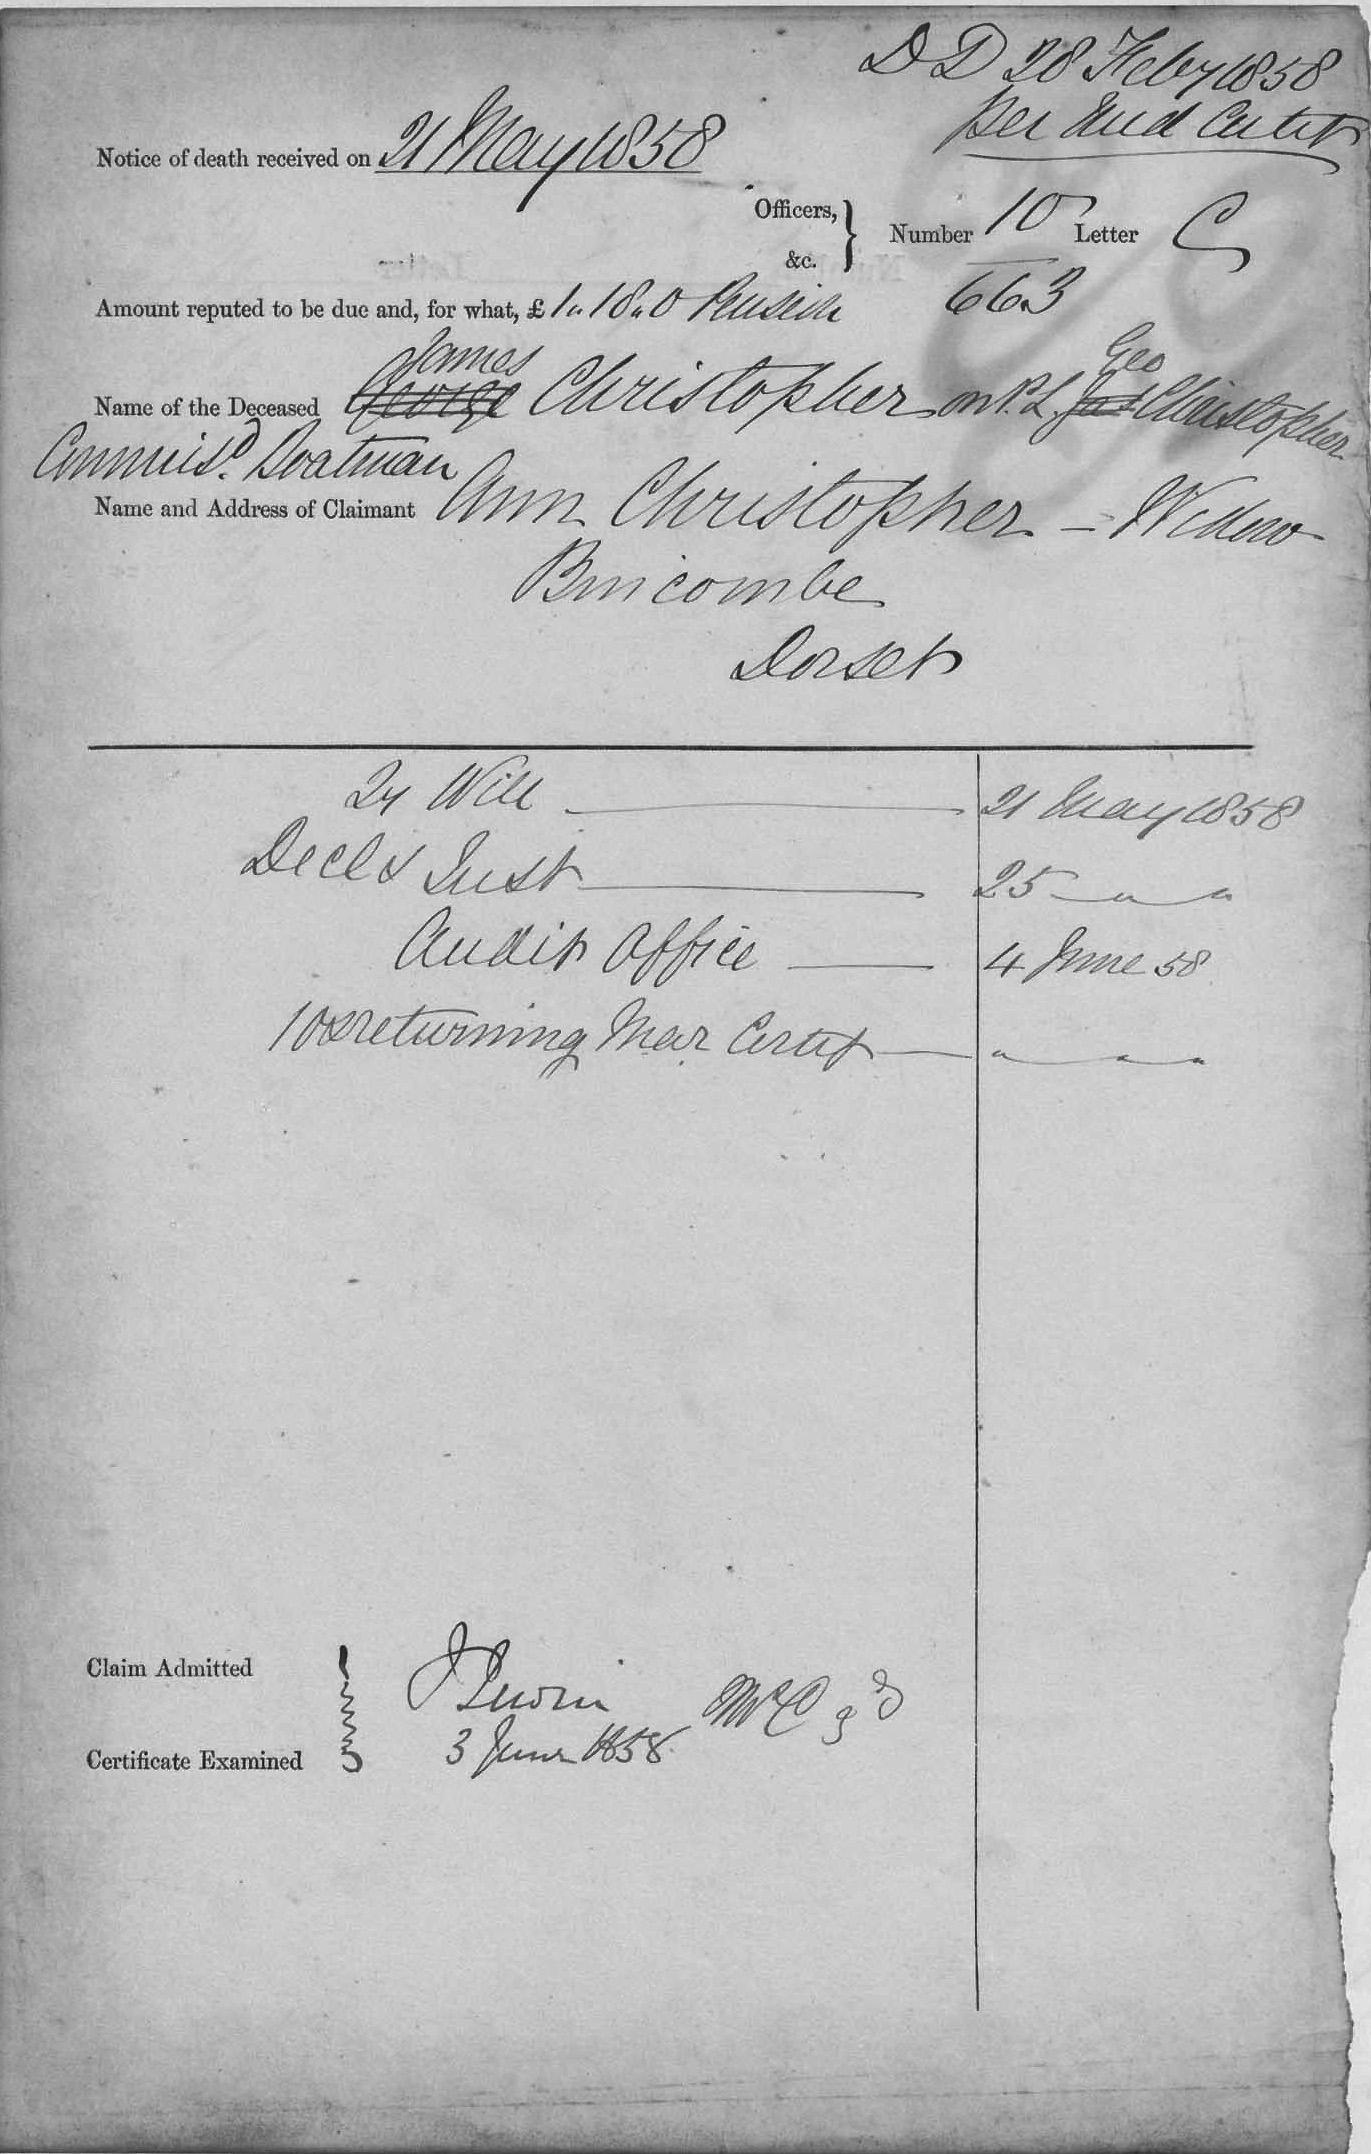  James Christopher Service Record